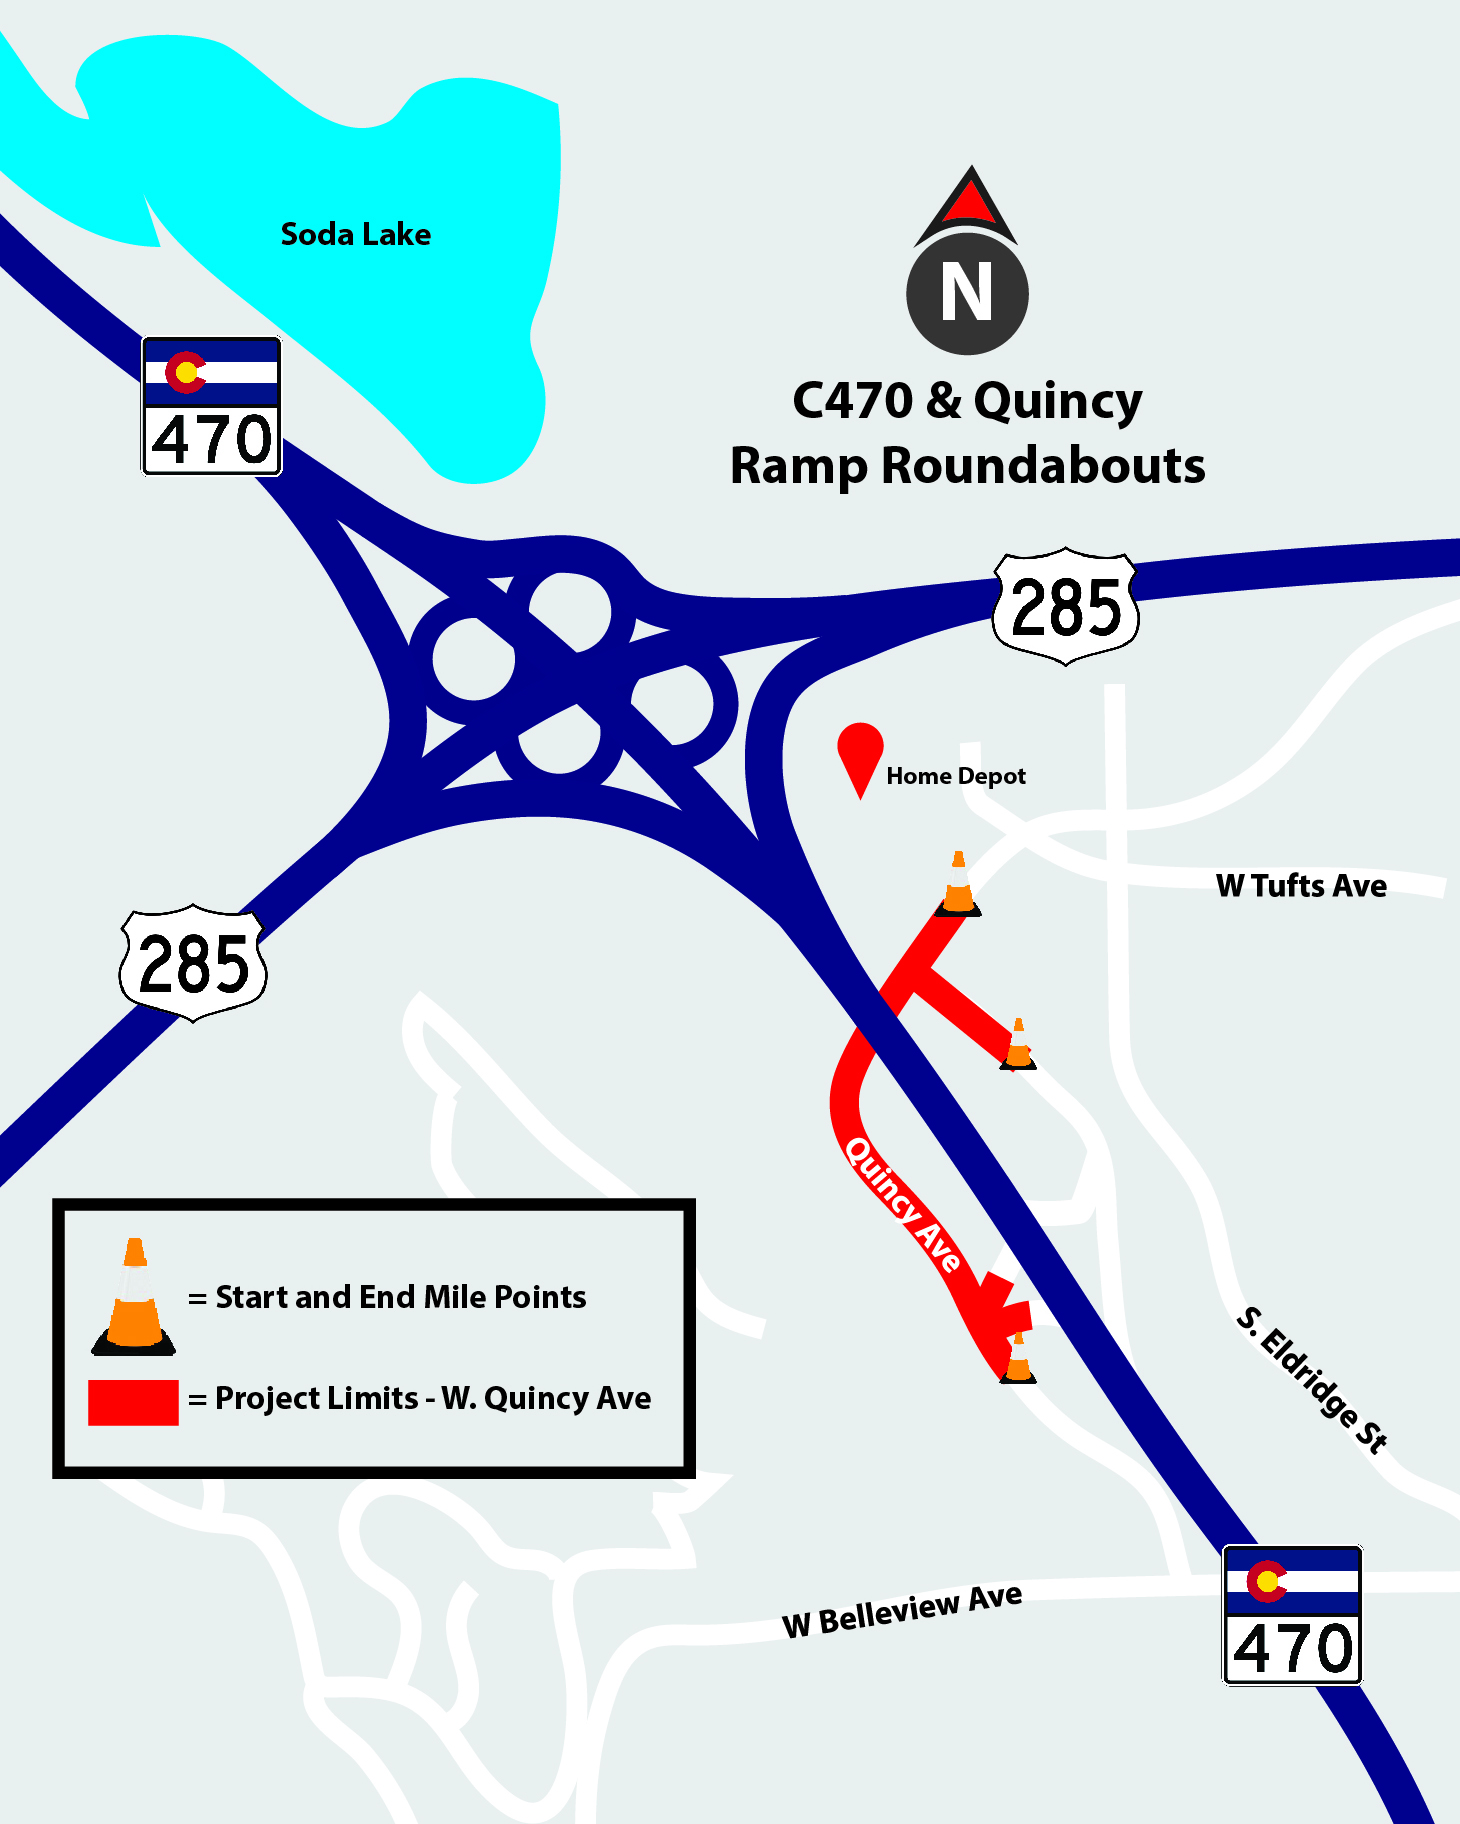 C470_Quincy_Roundabouts_24464_Map.jpg detail image